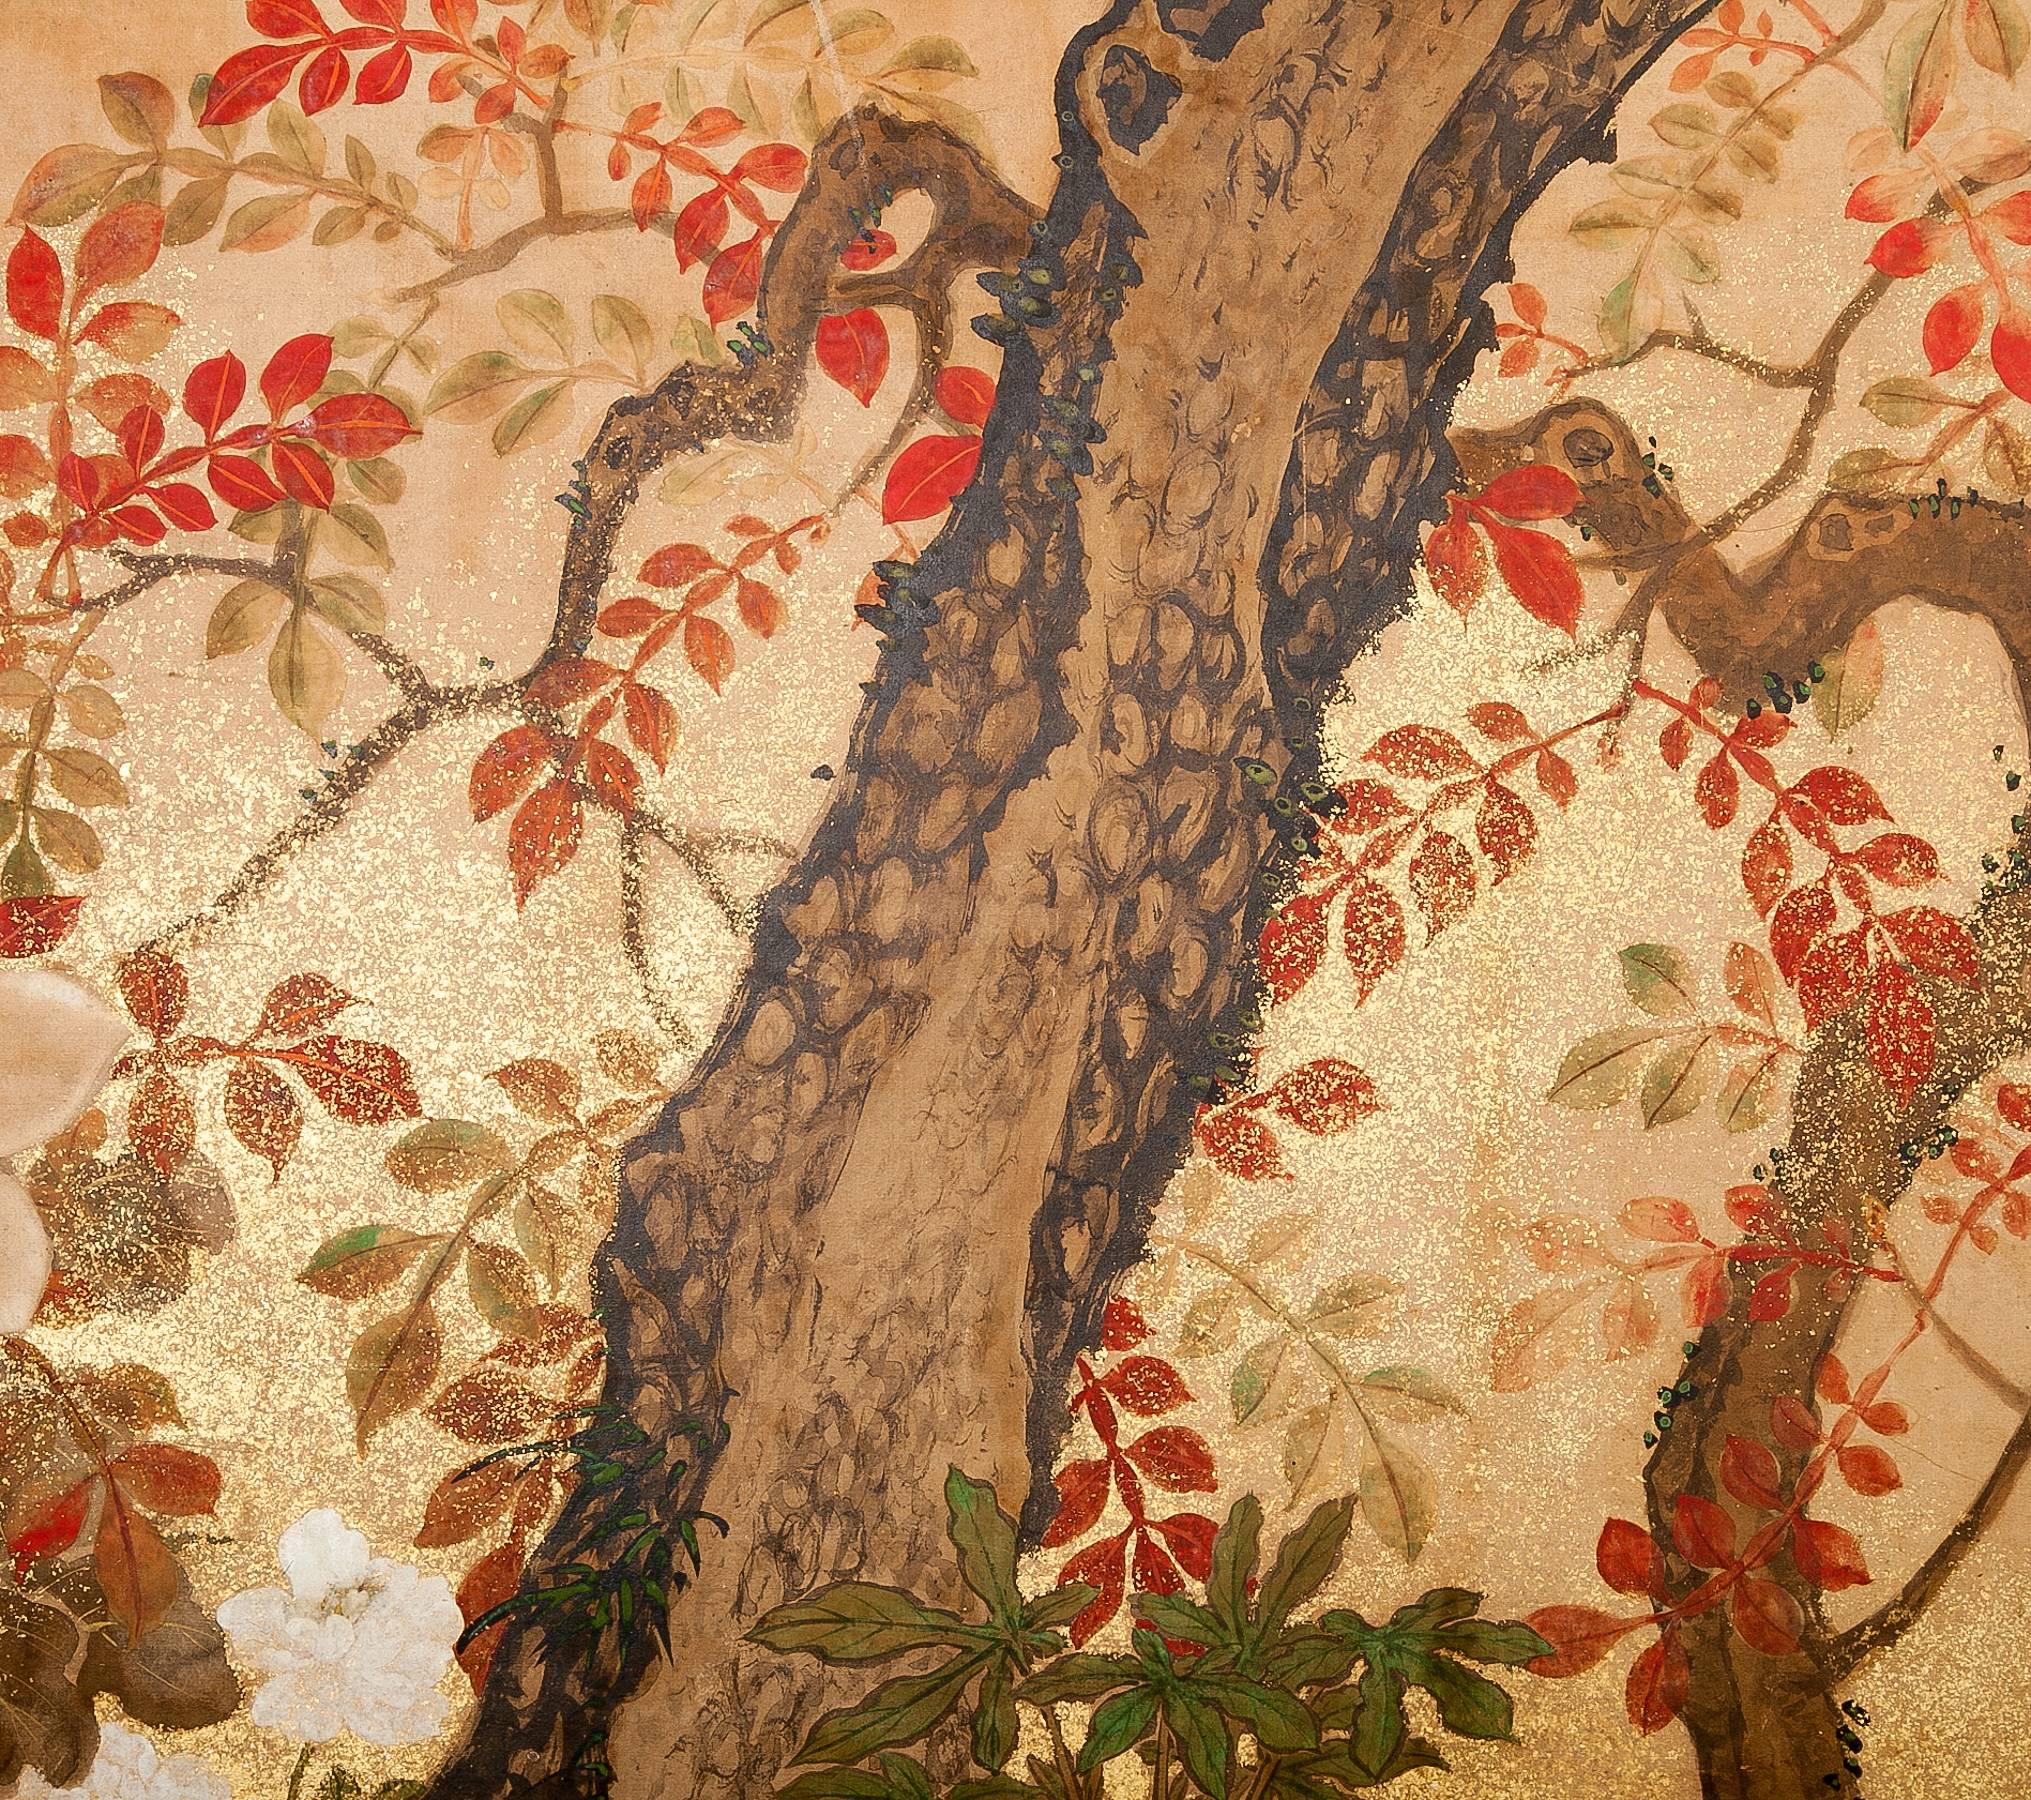 Japanese Two Panel Screen: Trees in Floral Landscape, Edo period painting (mid 19th century) of pine and other trees amongst flowers, with bamboo shoots on the right panel, and white camellias blooming in the center.  Beautifully painted in mineral